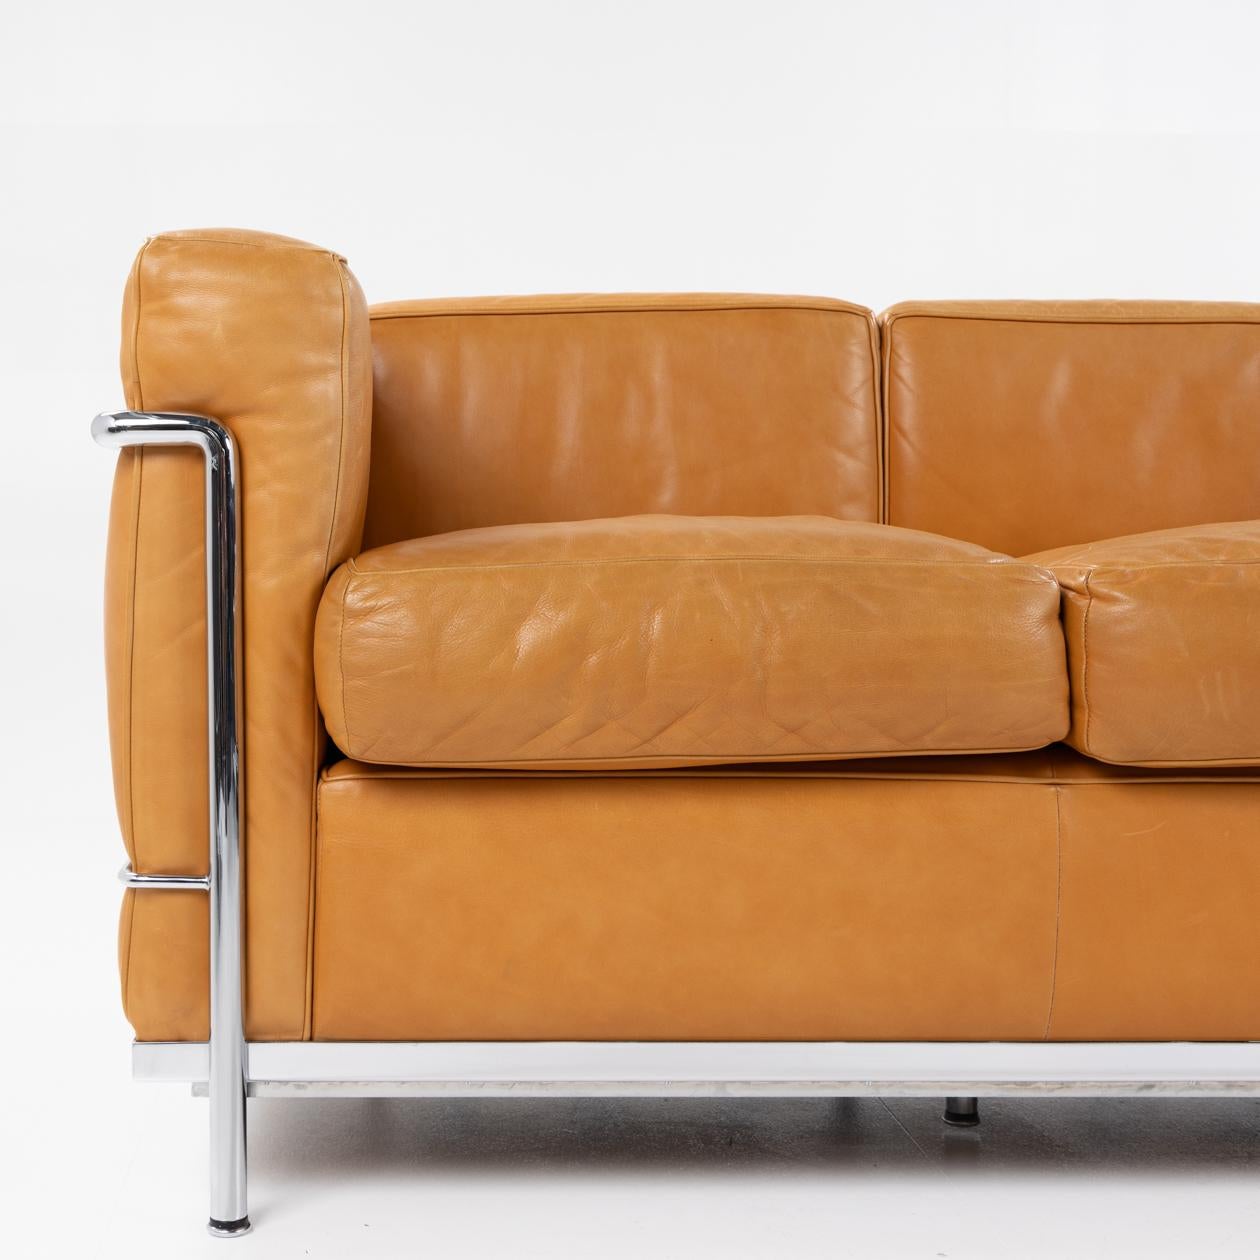 Patinated LC 3 three seater sofa by Le Corbusier